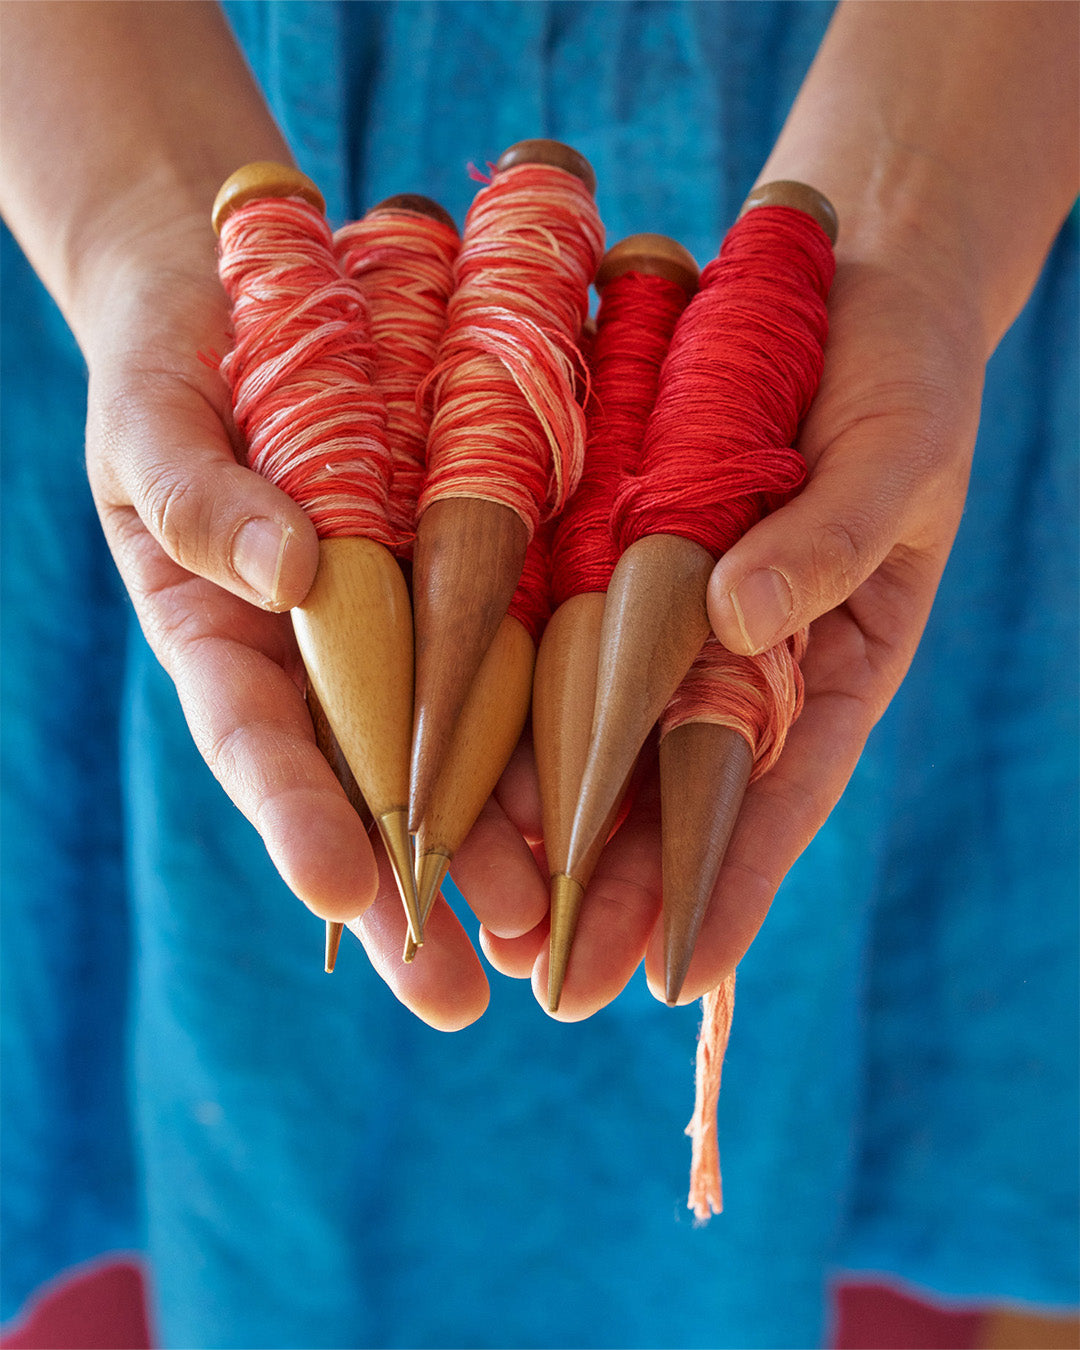 Hands of Ema Shine holding wooden spindles wound with red and variegated yarn, symbolizing the traditional craftsmanship and vibrant creativity in women's textile work.